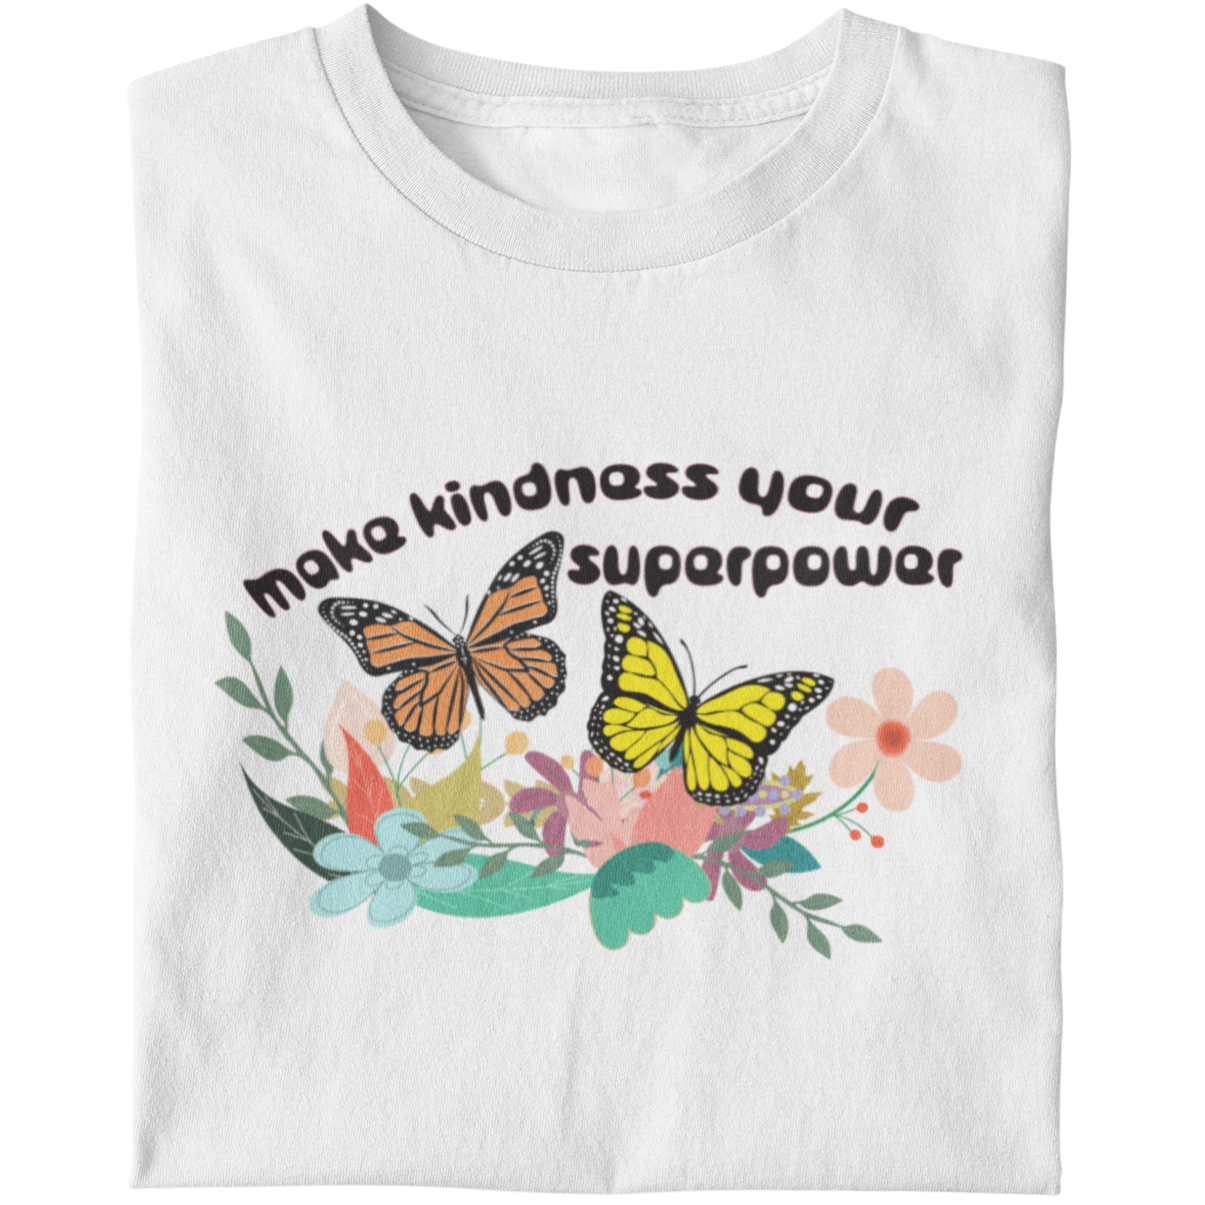 Make Kindness Your Superpower - Unisex T-Shirt